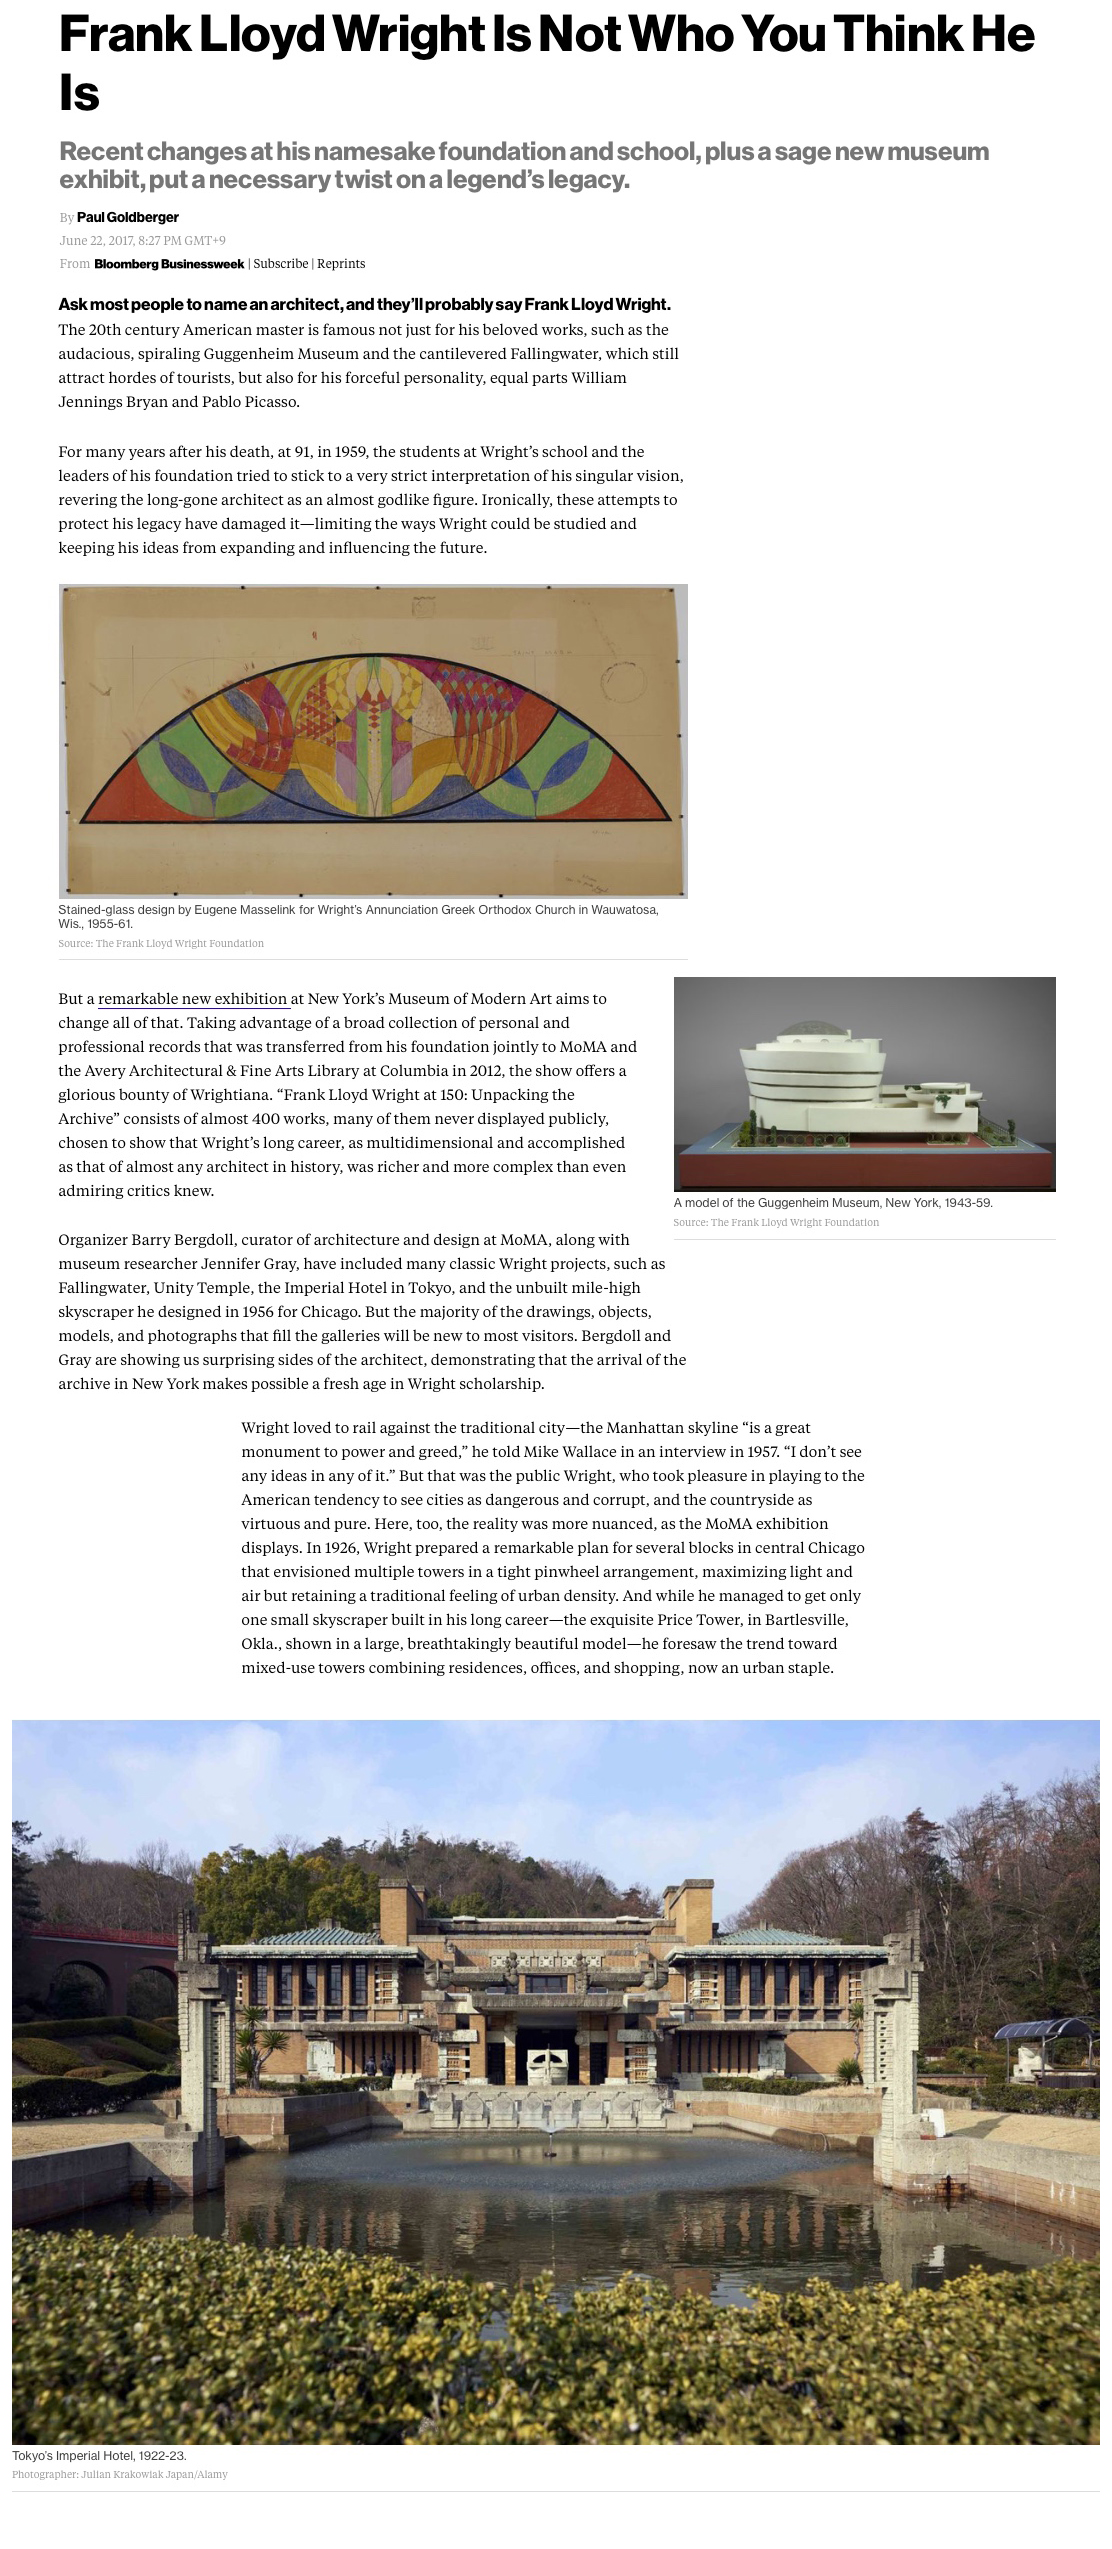 Screenshot of an article about Frank Lloyd Wright published by Bloomberg Pursuits.